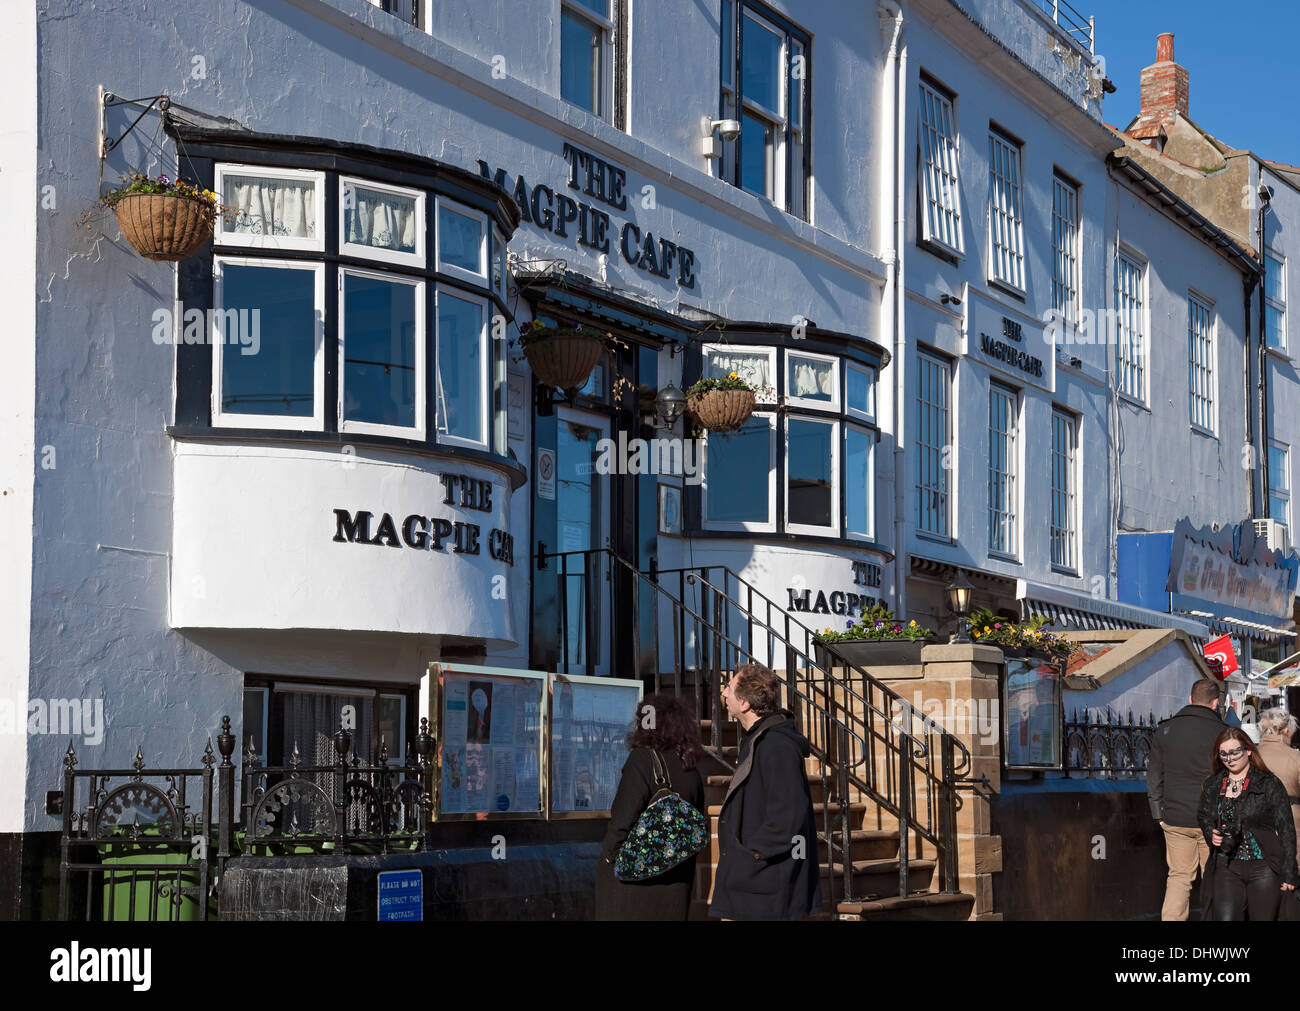 The Magpie Cafe fish and chip chips shop restaurant exterior Whitby North Yorkshire England UK United Kingdom GB Great Britain Stock Photo